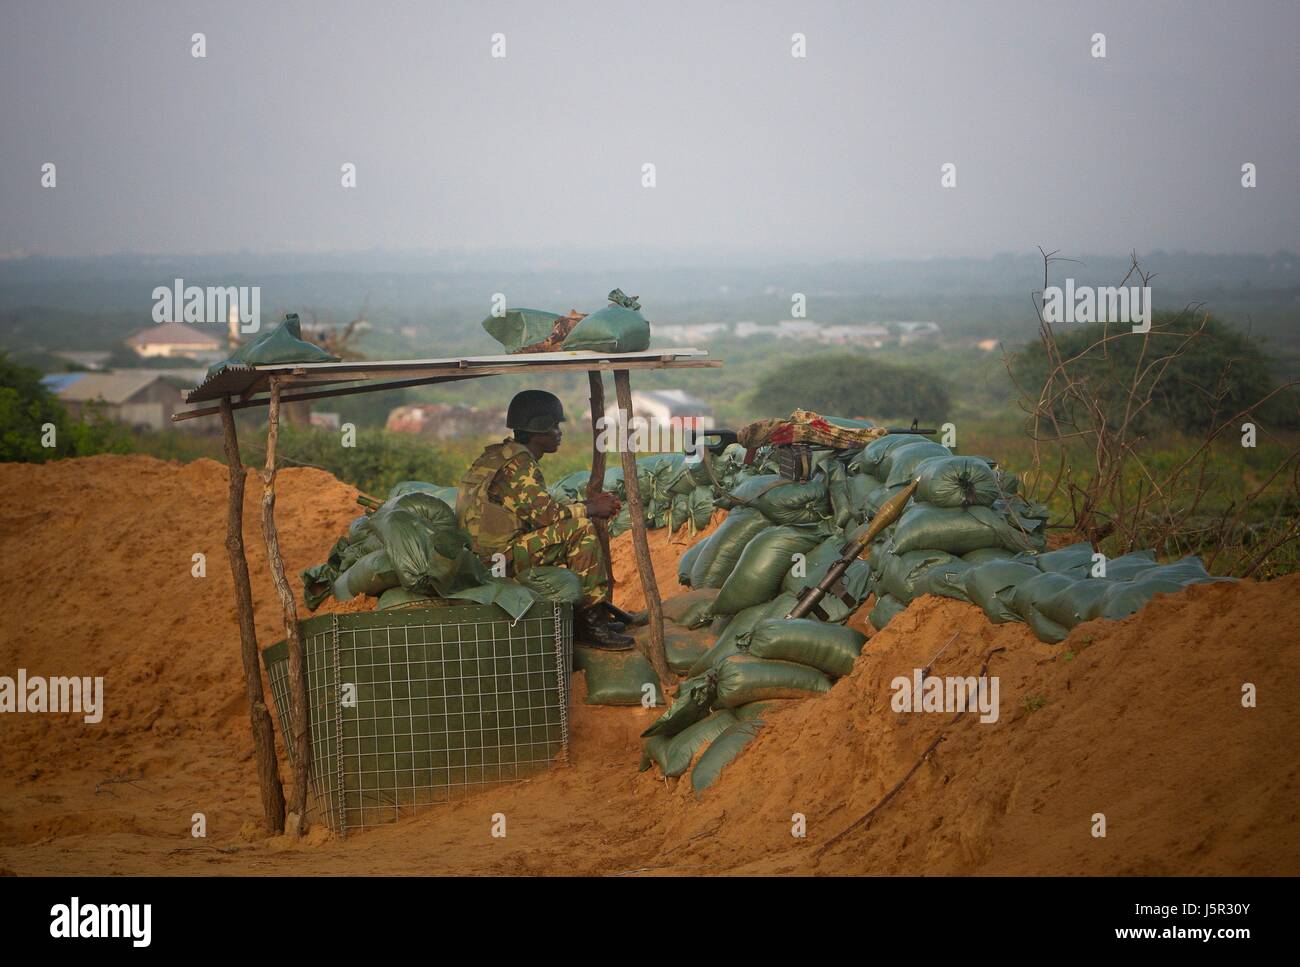 African Union Mission in Somalia (AMISOM) Burundian soldiers man the frontline in a territory recently captured from insurgents in the Deynile District November 18, 2011 near Mogadishu, Somalia.    (photo by Stuart Price/ANISOM via Planetpix) Stock Photo